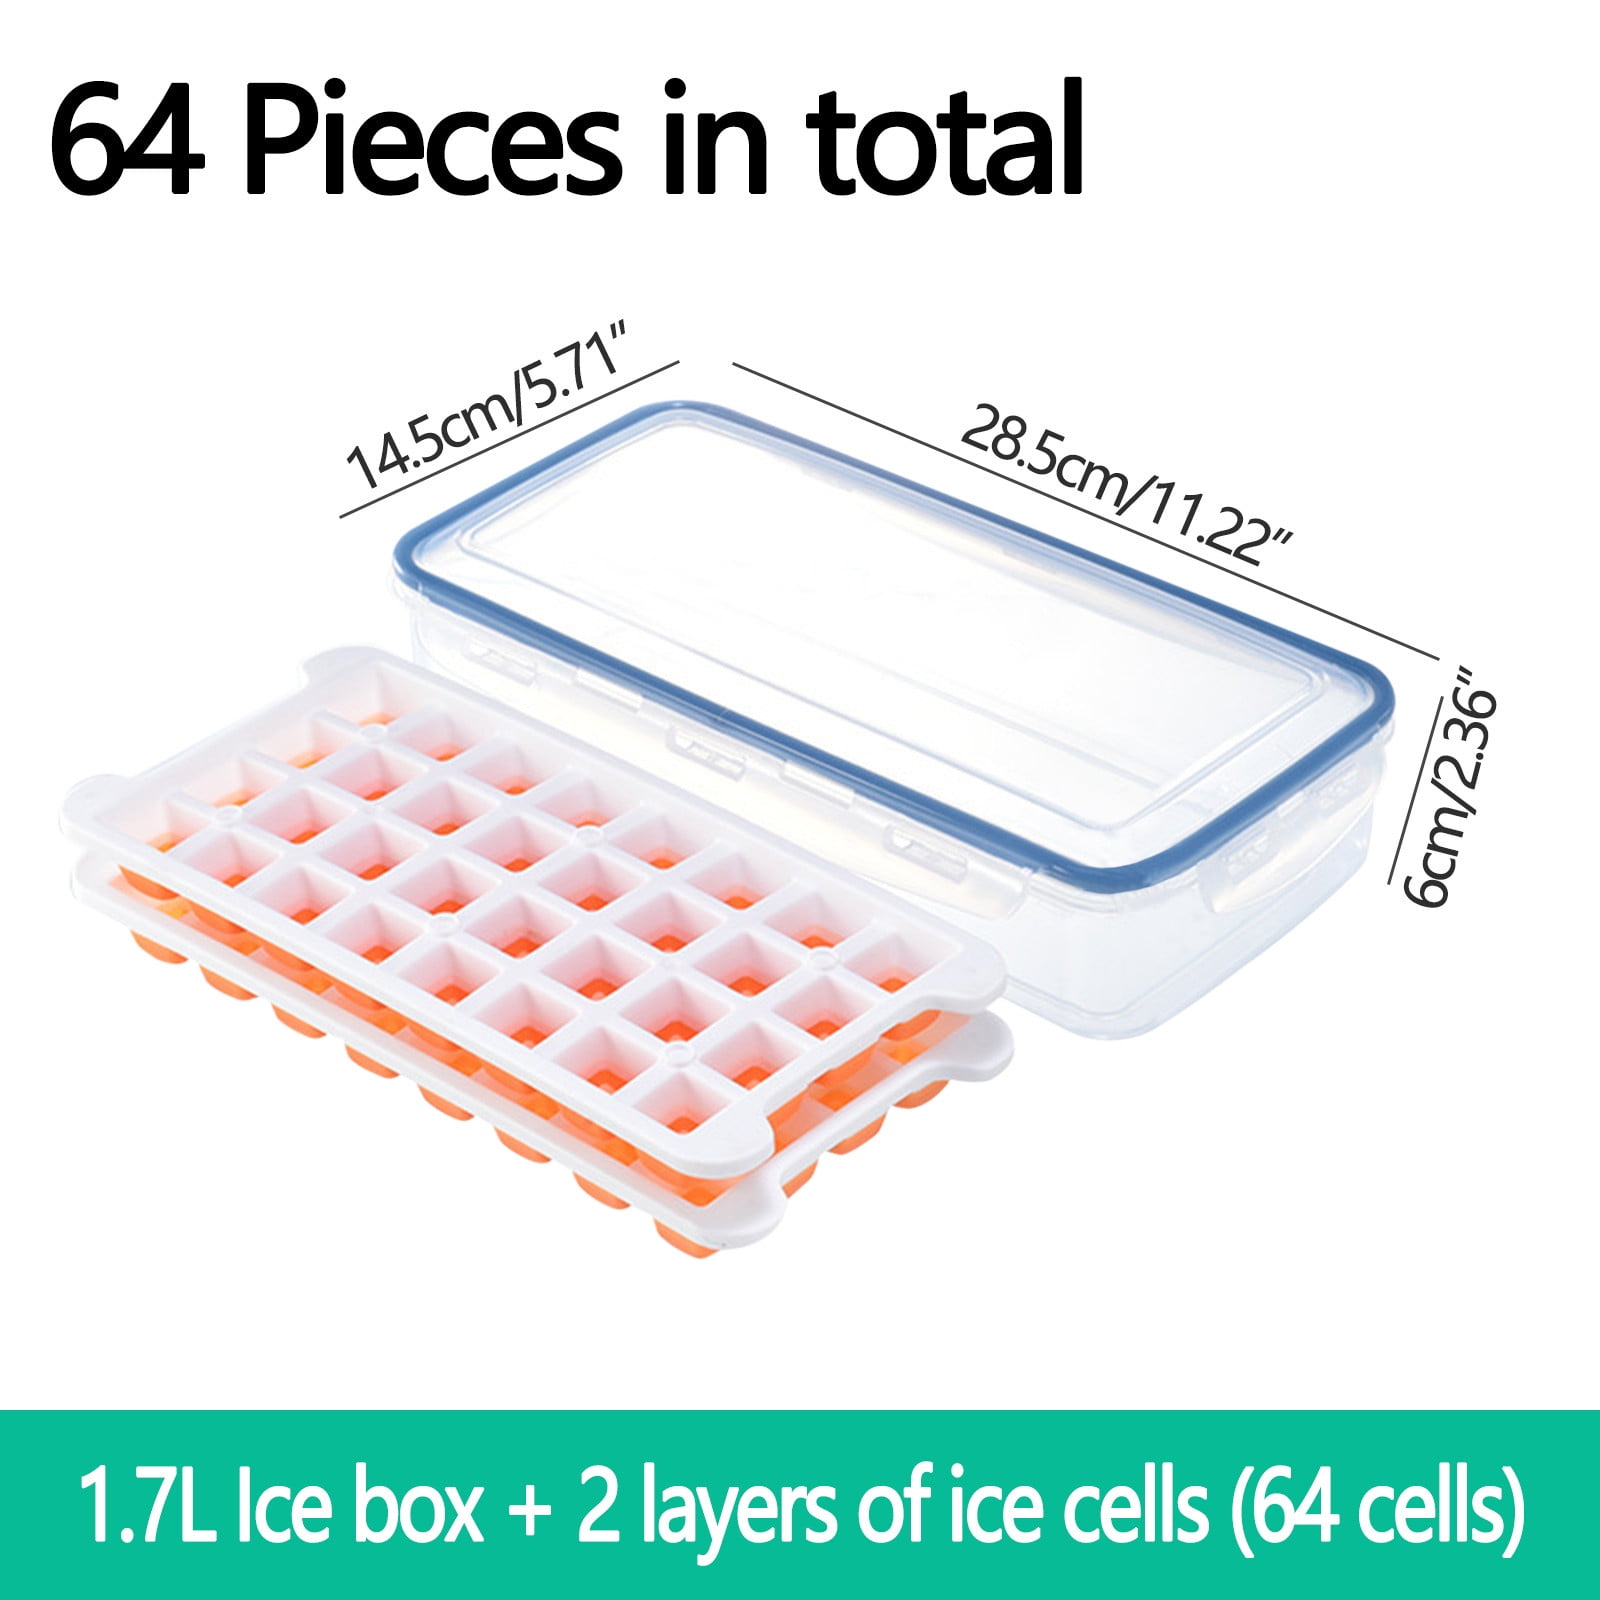  3 Pack Round Ice Cube Tray, Sphere Ice Ball Maker Mold Making  for Freezer with Container, 99pcs Circle Ice Chilling Cocktail Whiskey Tea  Coffee(3Pack Blue Ice trays & Ice Bin 